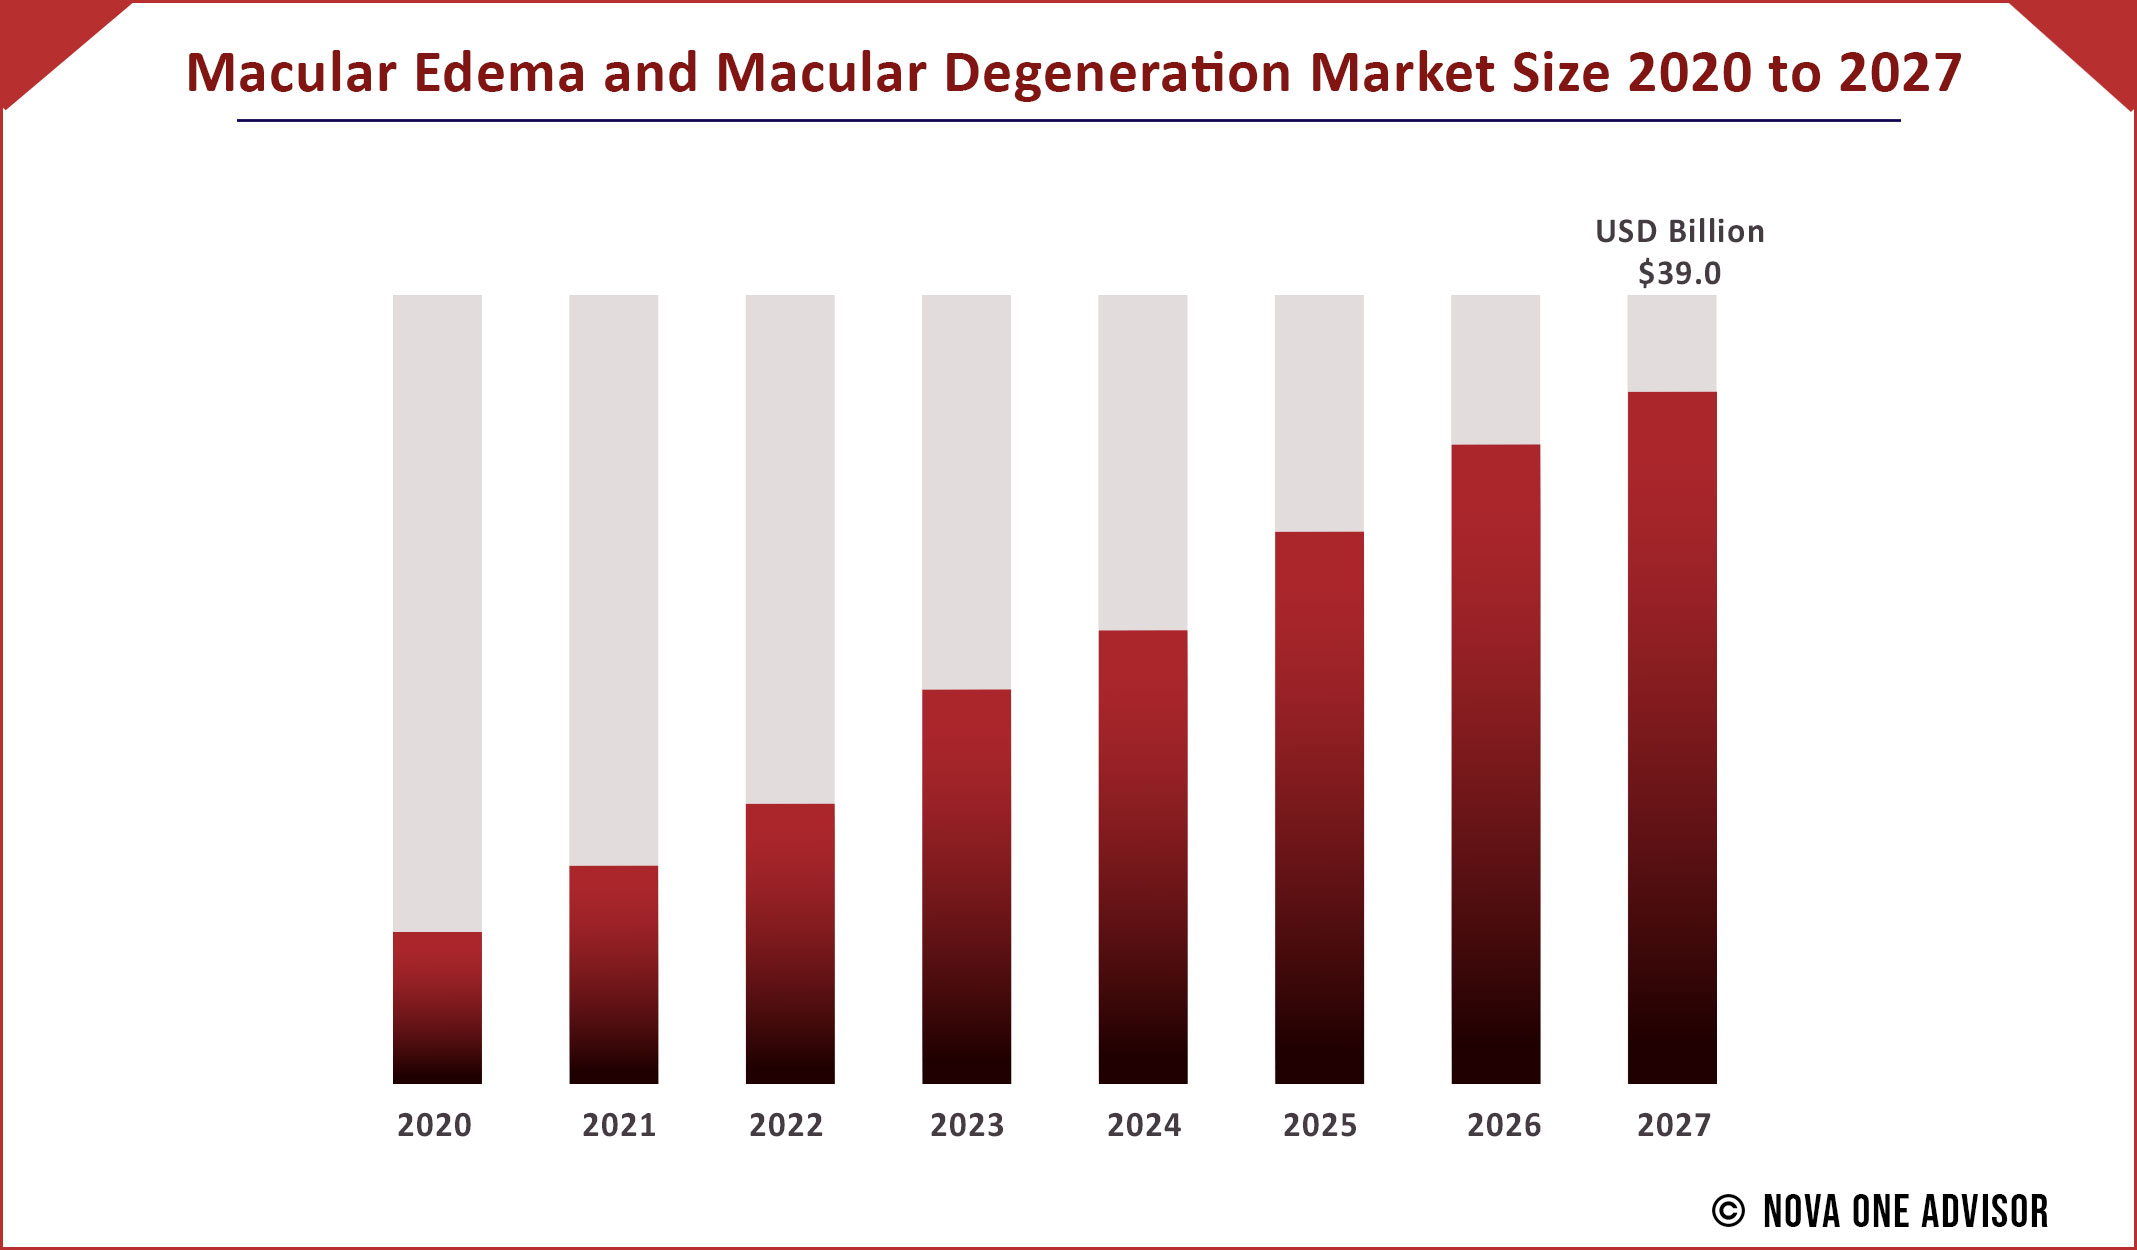 Macular Edema and Macular Degeneration Market Size 2020 to 2027